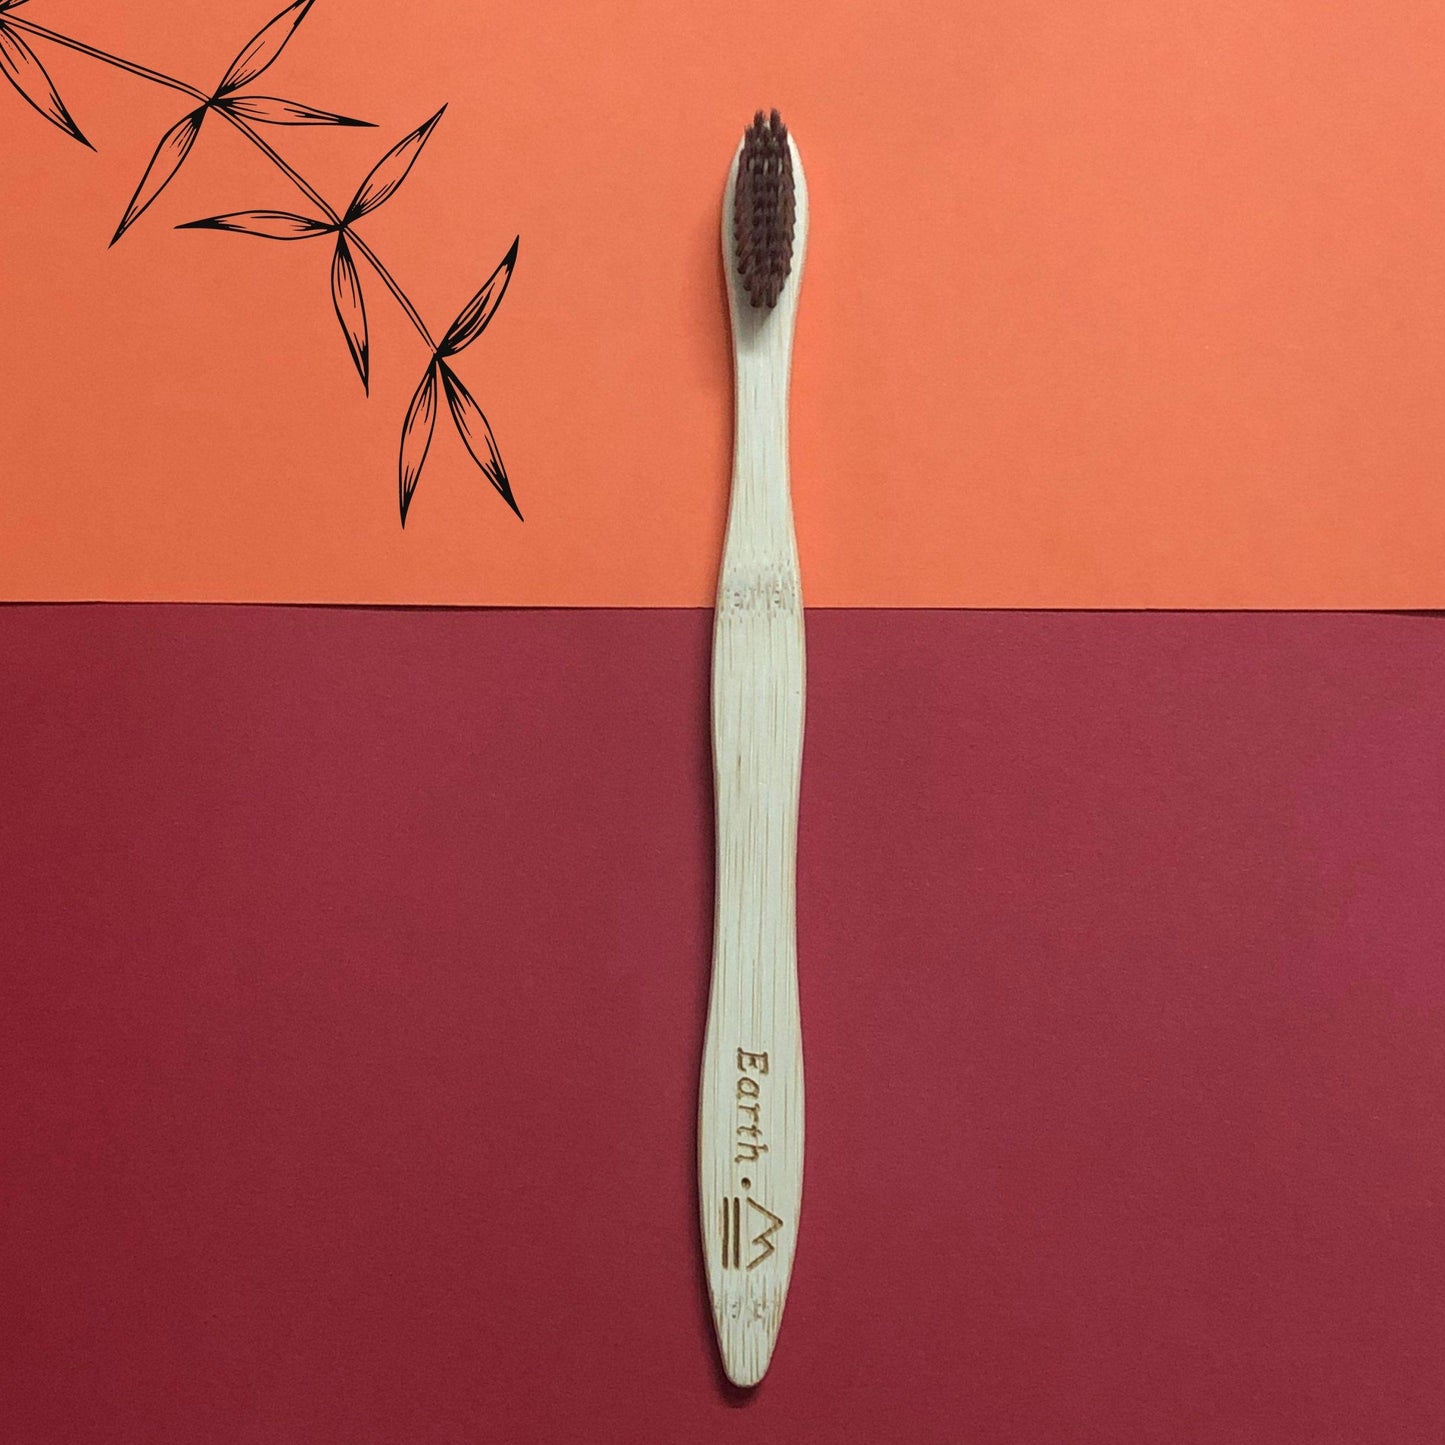 100% Biodegradable Bamboo Toothbrush with Soft Charcoal-activated Bristles - Earth